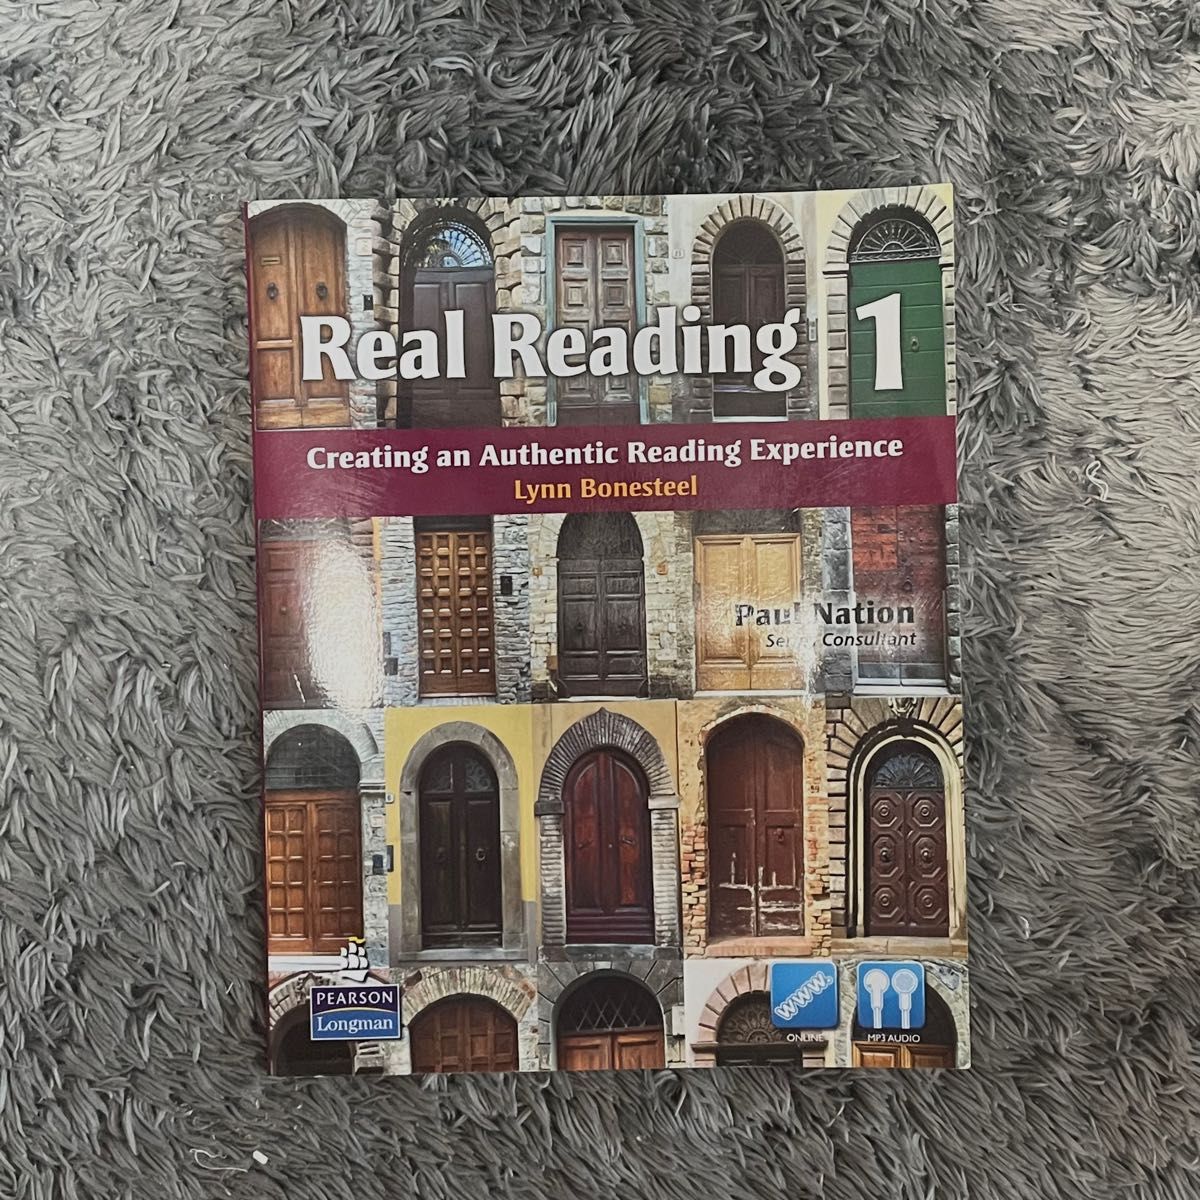 Real Reading Student Book with MP3 Audio CD-ROM (レベル 1)